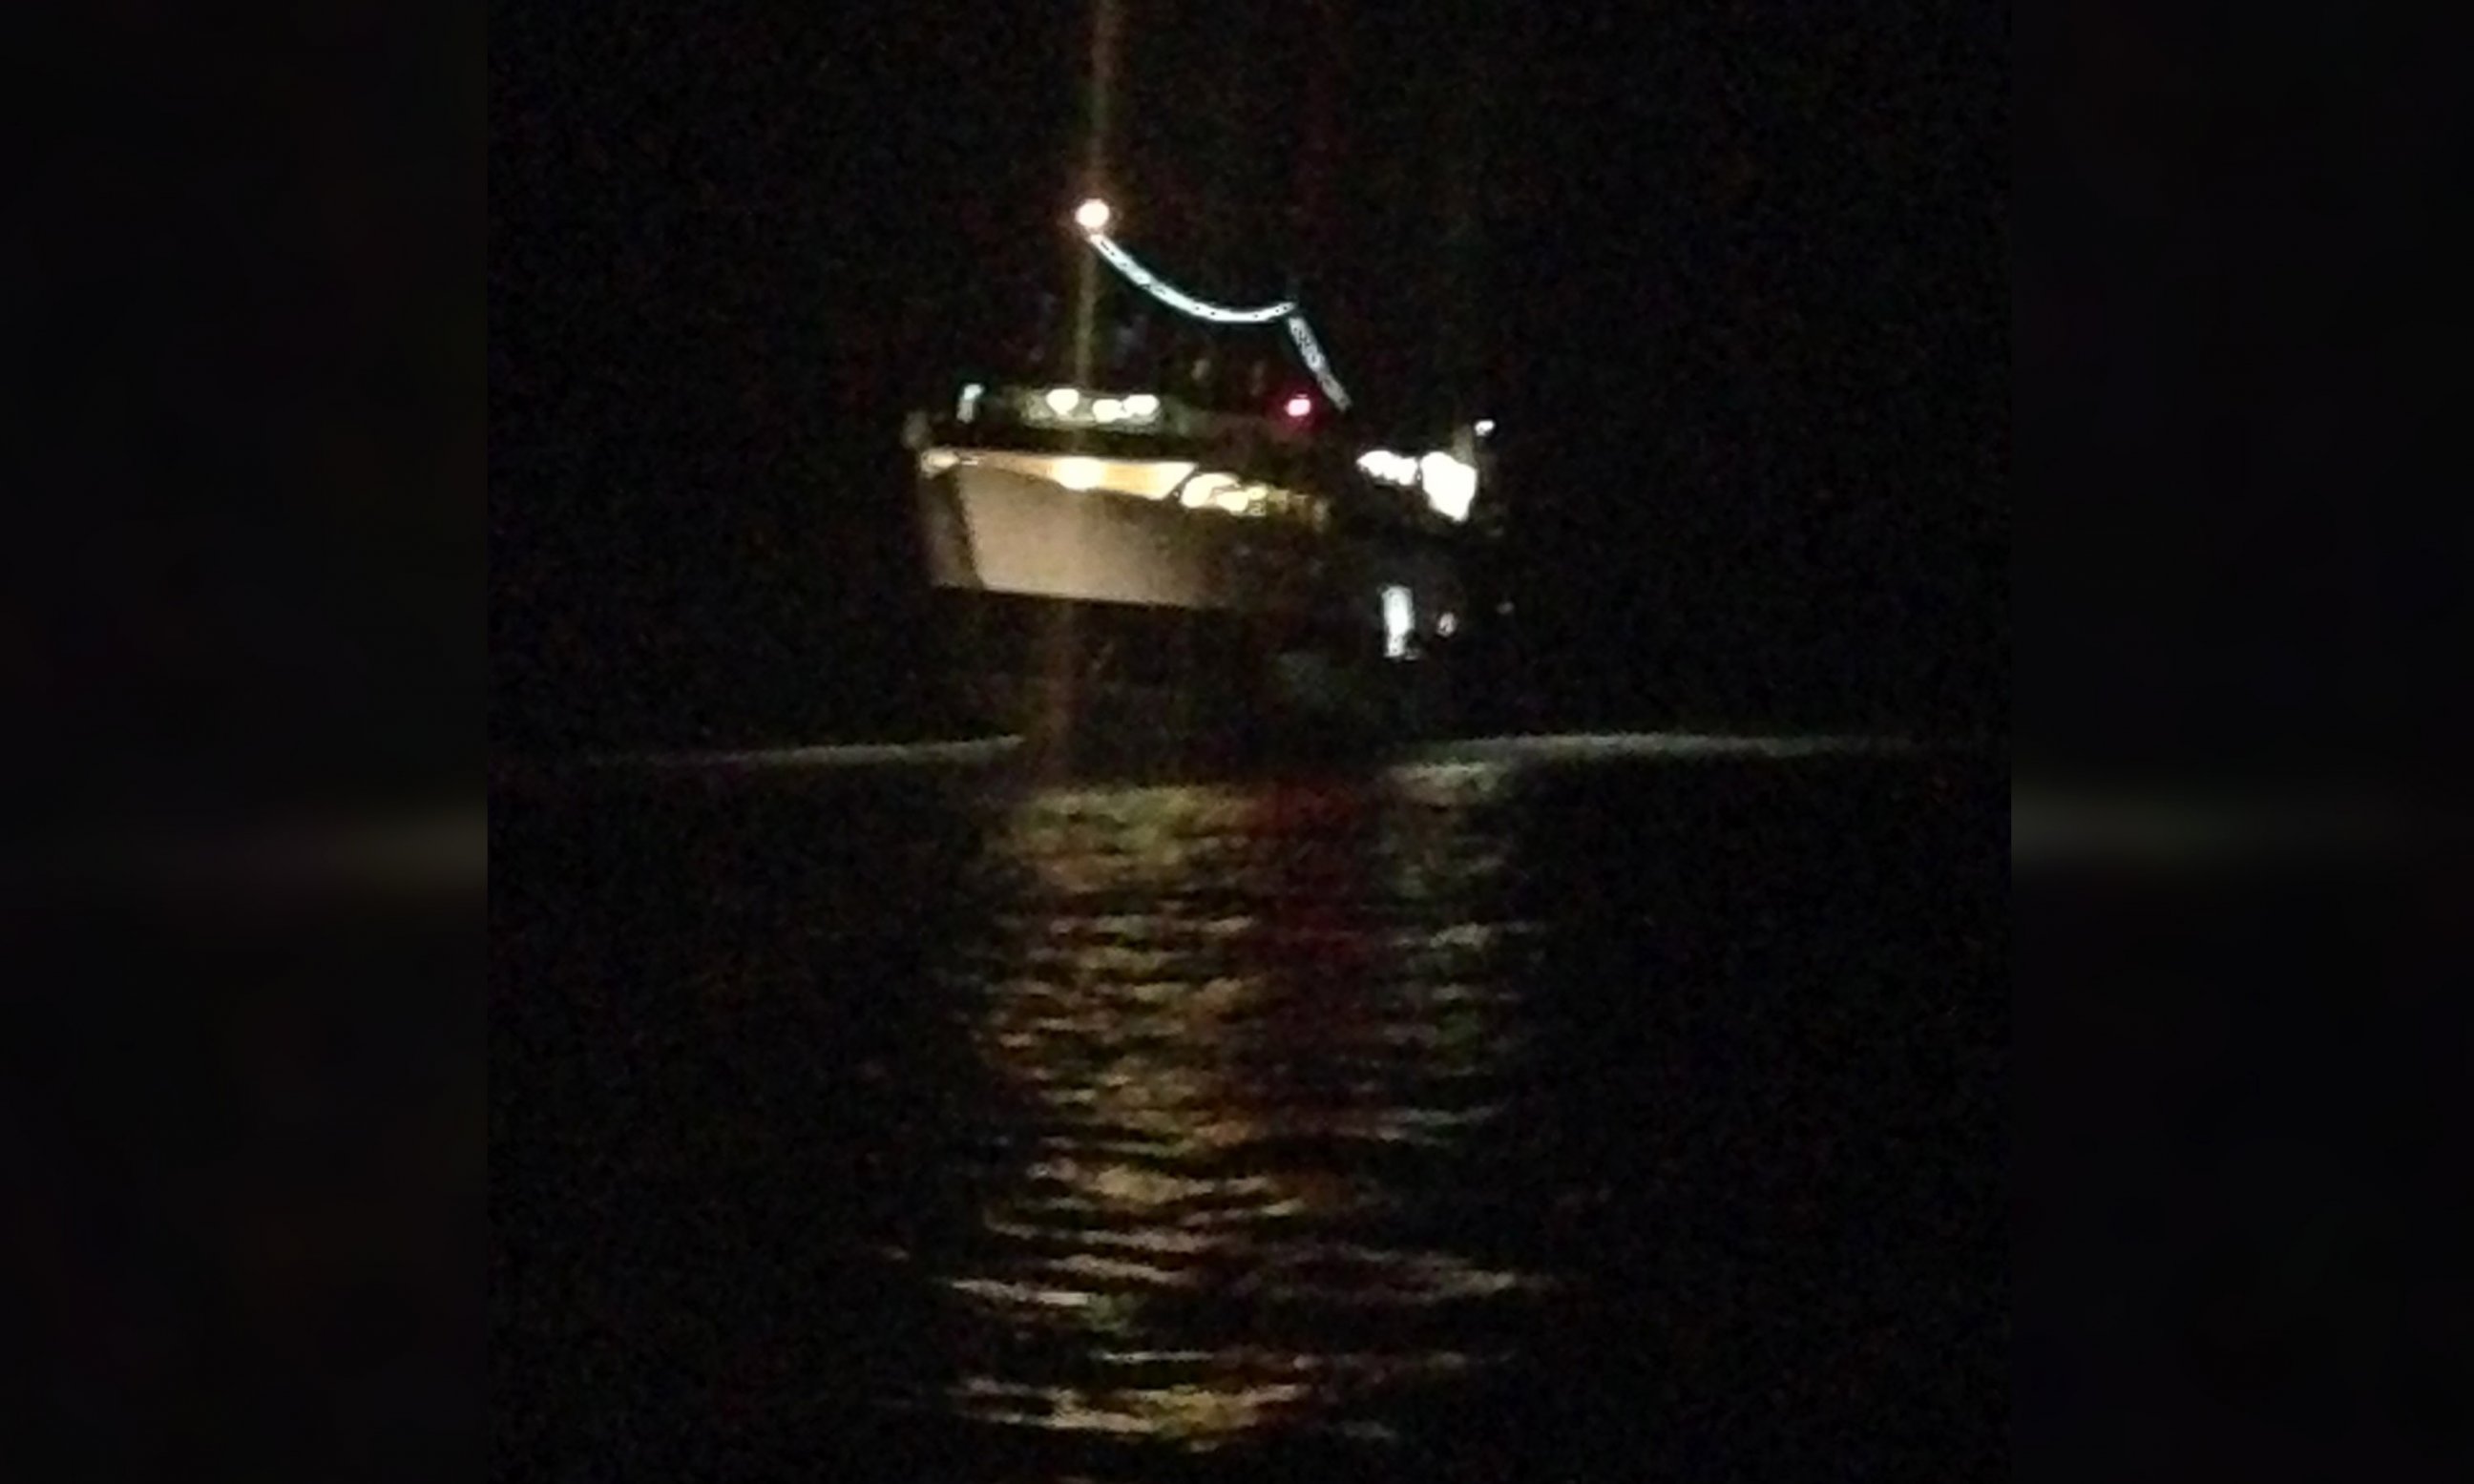 PHOTO: The stranded casino boat Escapade is seen off of the shore of Tybee Island, Ga. in this handout image from the U.S. Coast Guard.